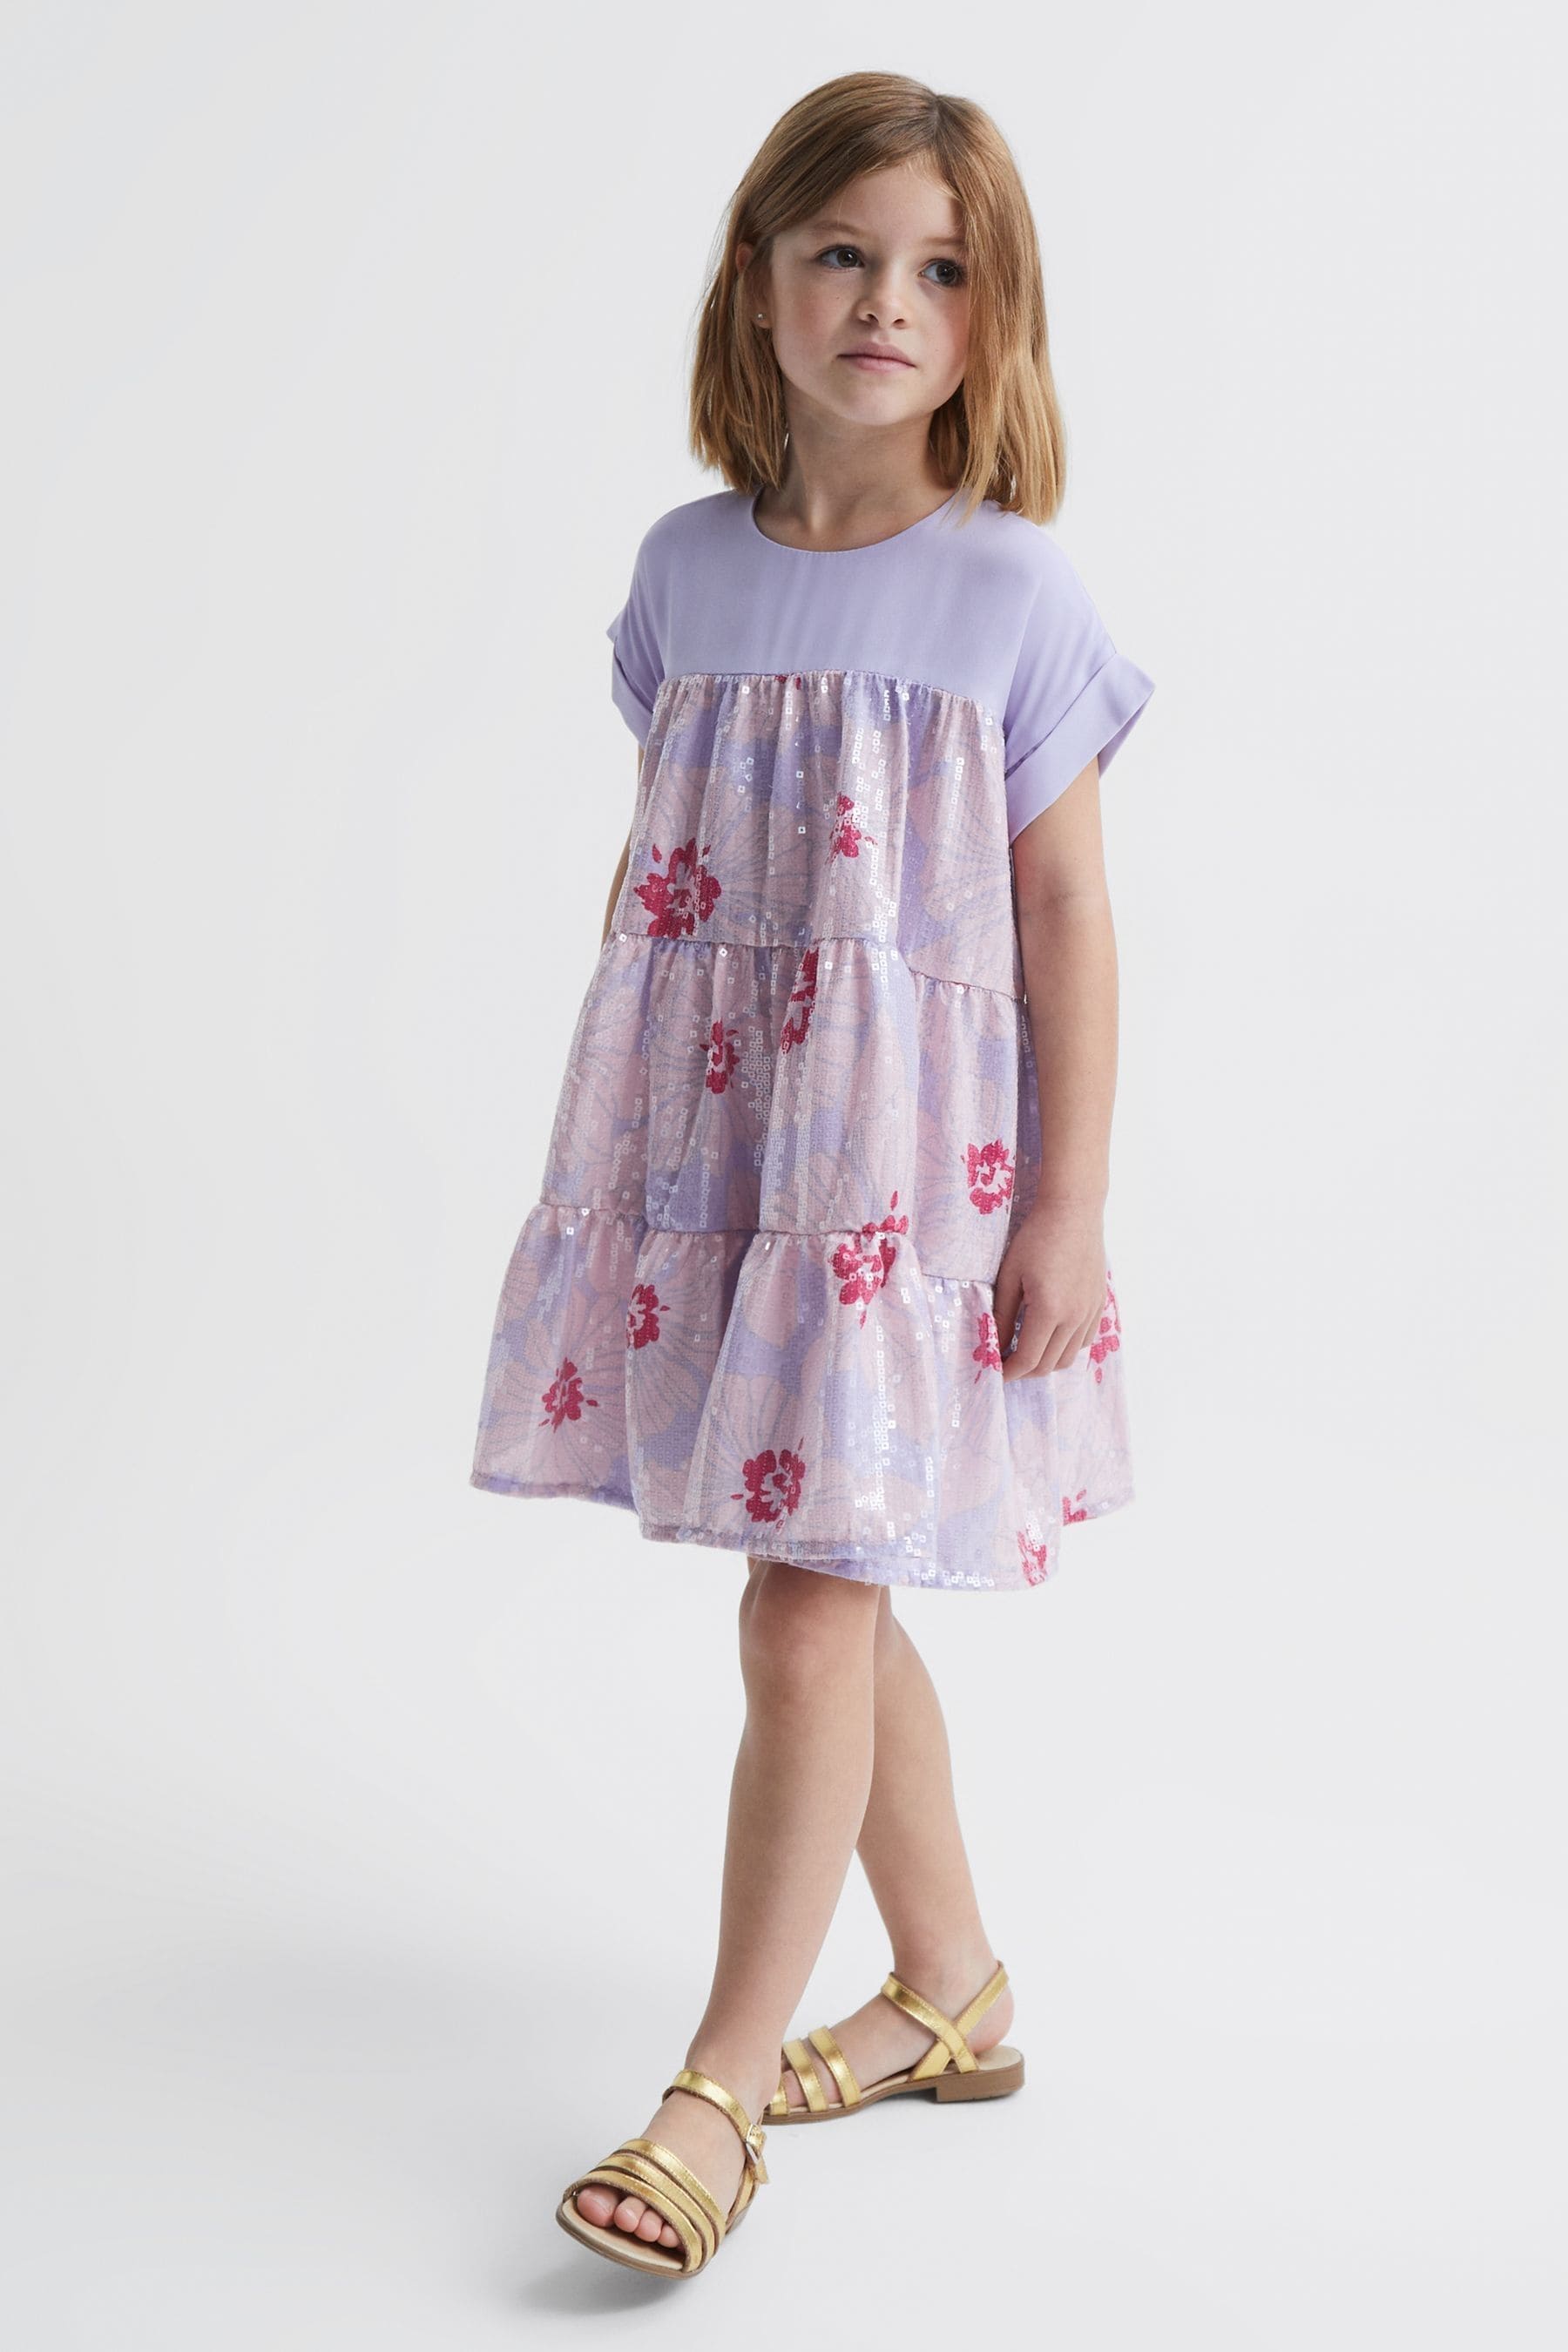 Reiss Kids' Lucie - Lilac Luci Junior Sequin Tiered Dress, Age 8-9 Years